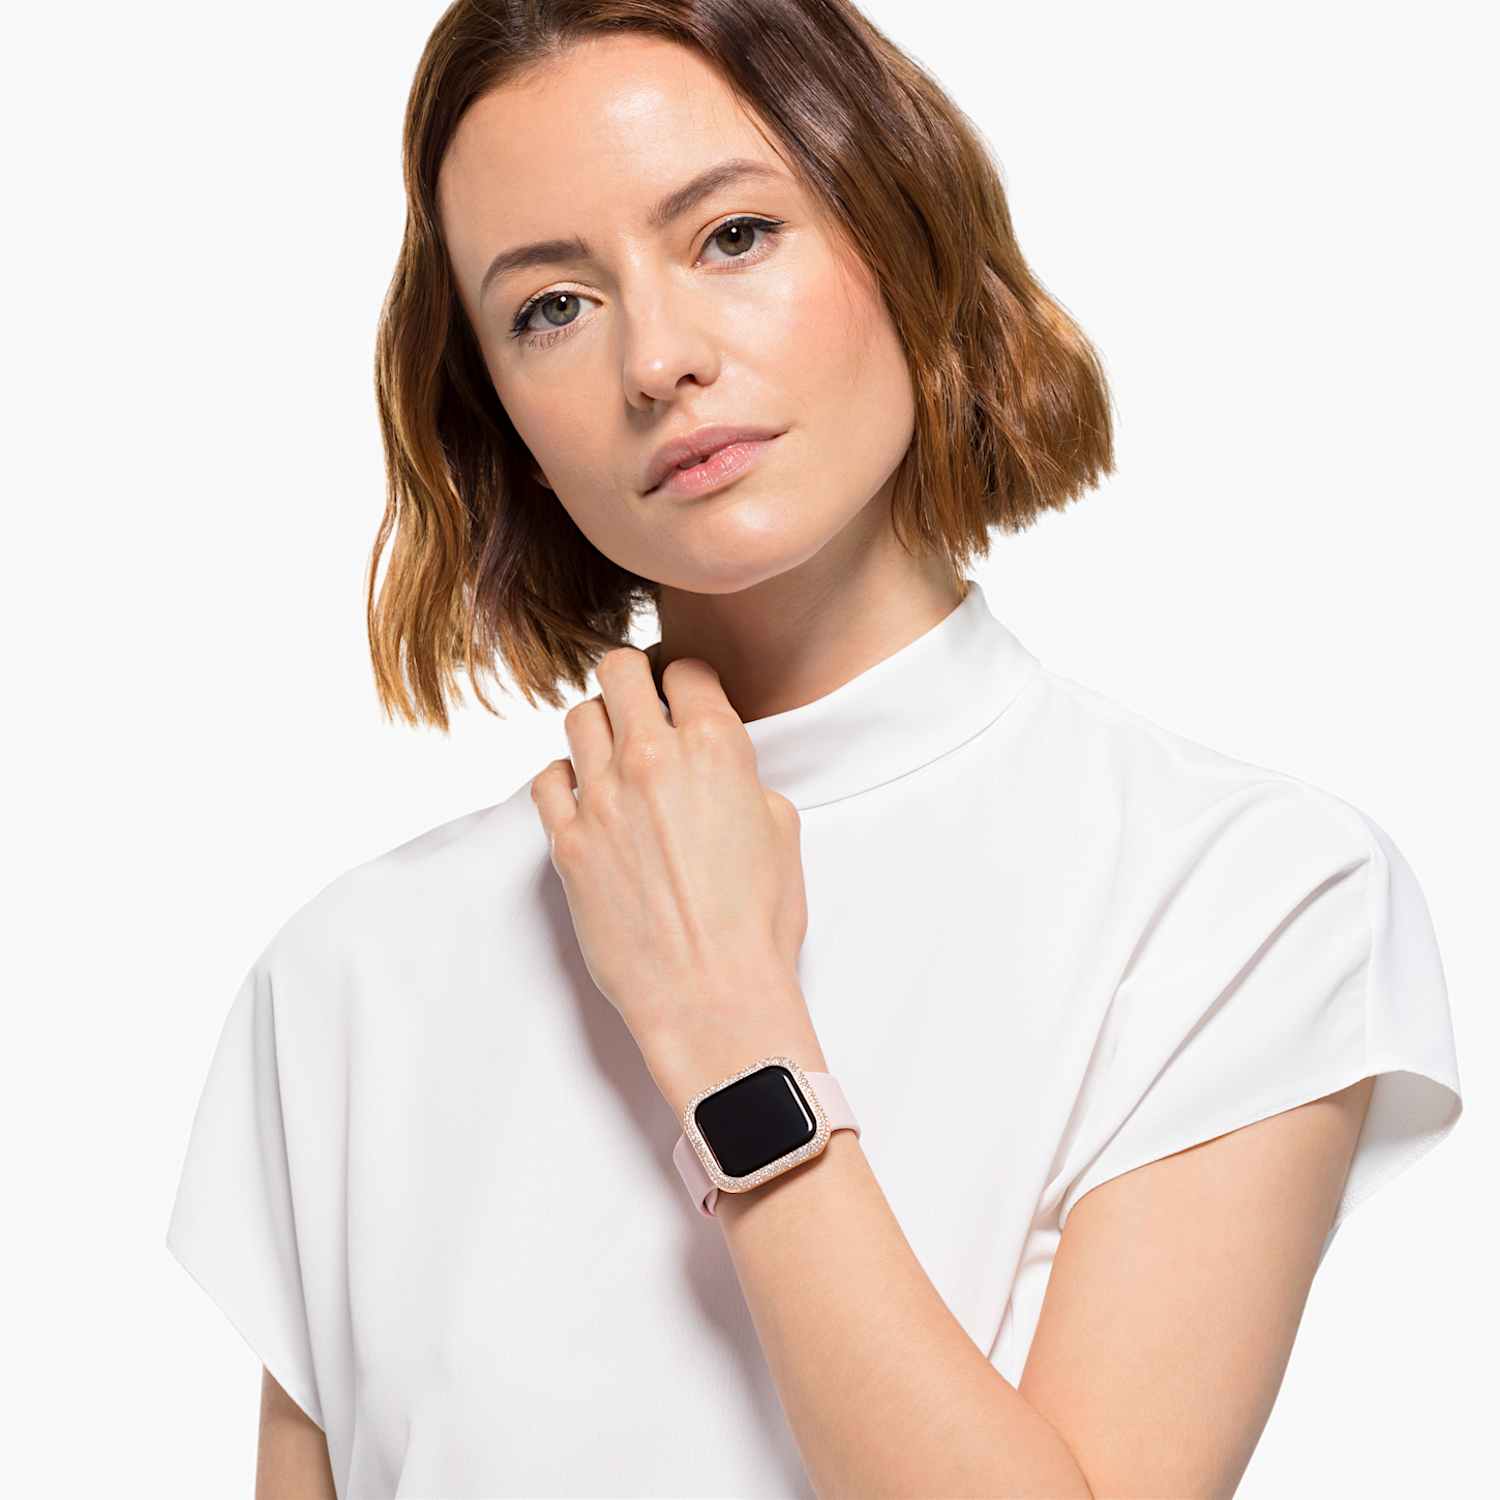 Sparkling case compatible with Apple watch®, 40 mm, Rose gold tone